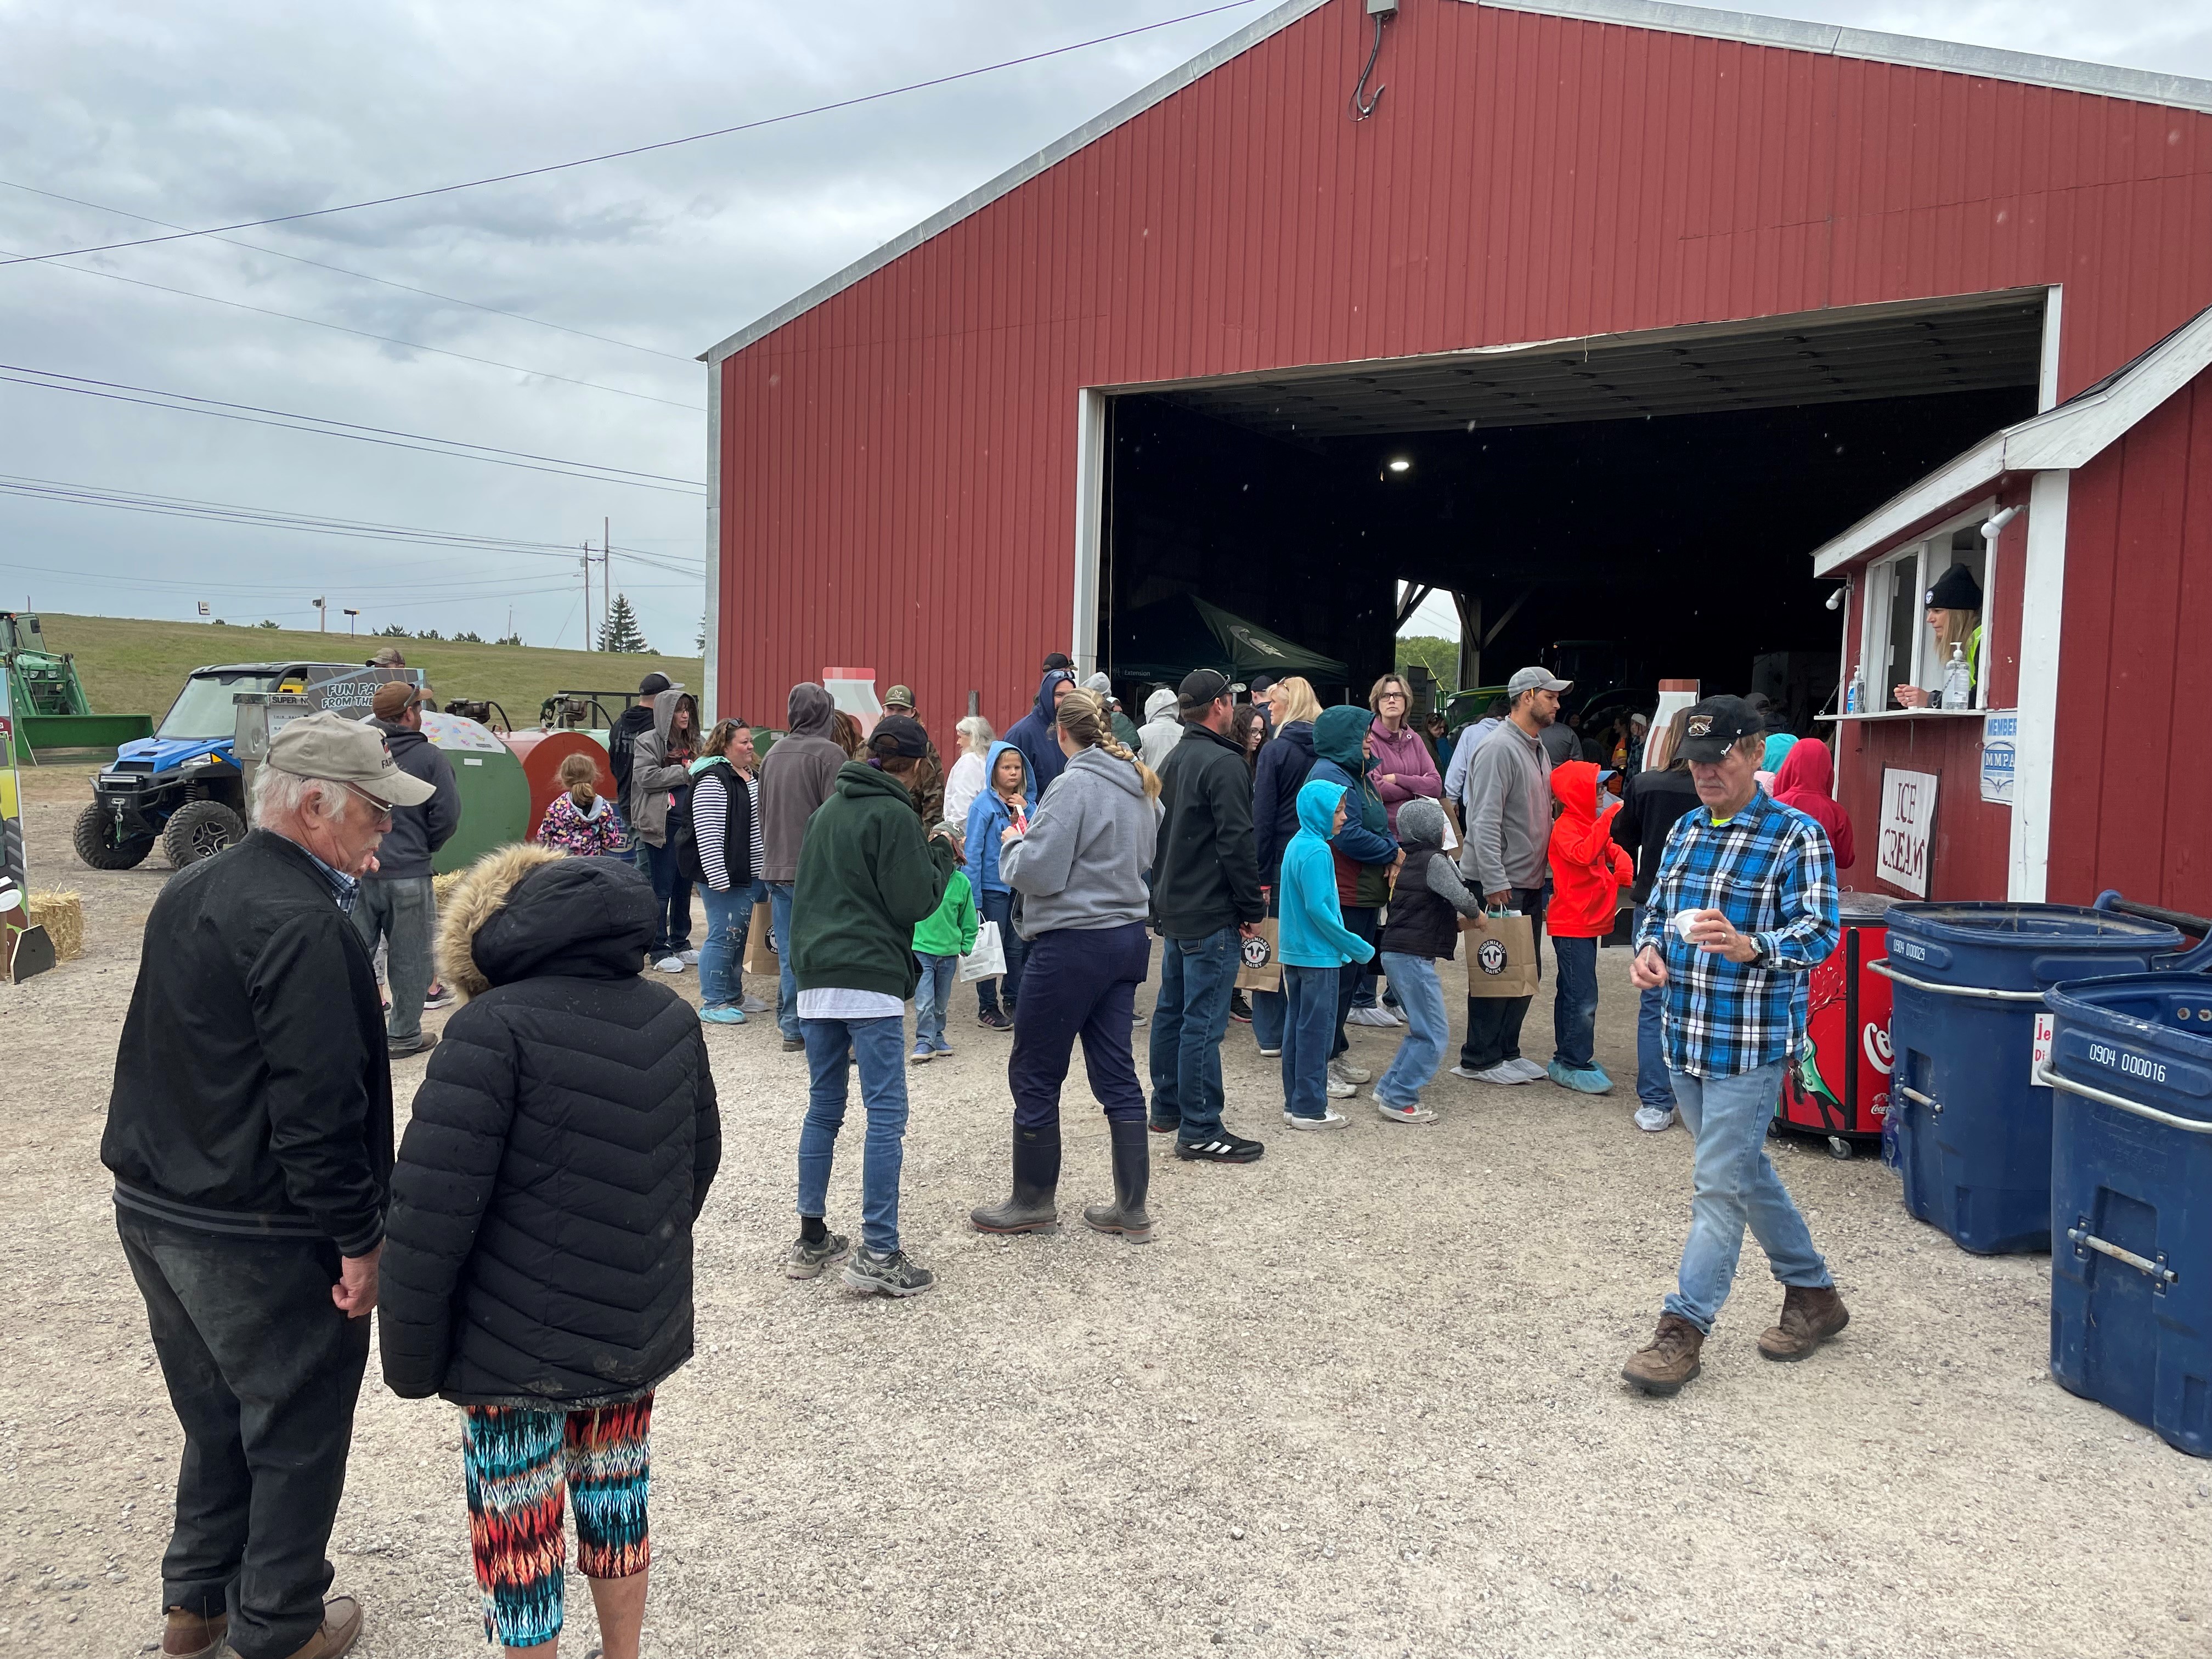 People standing in line outside of a red barn.